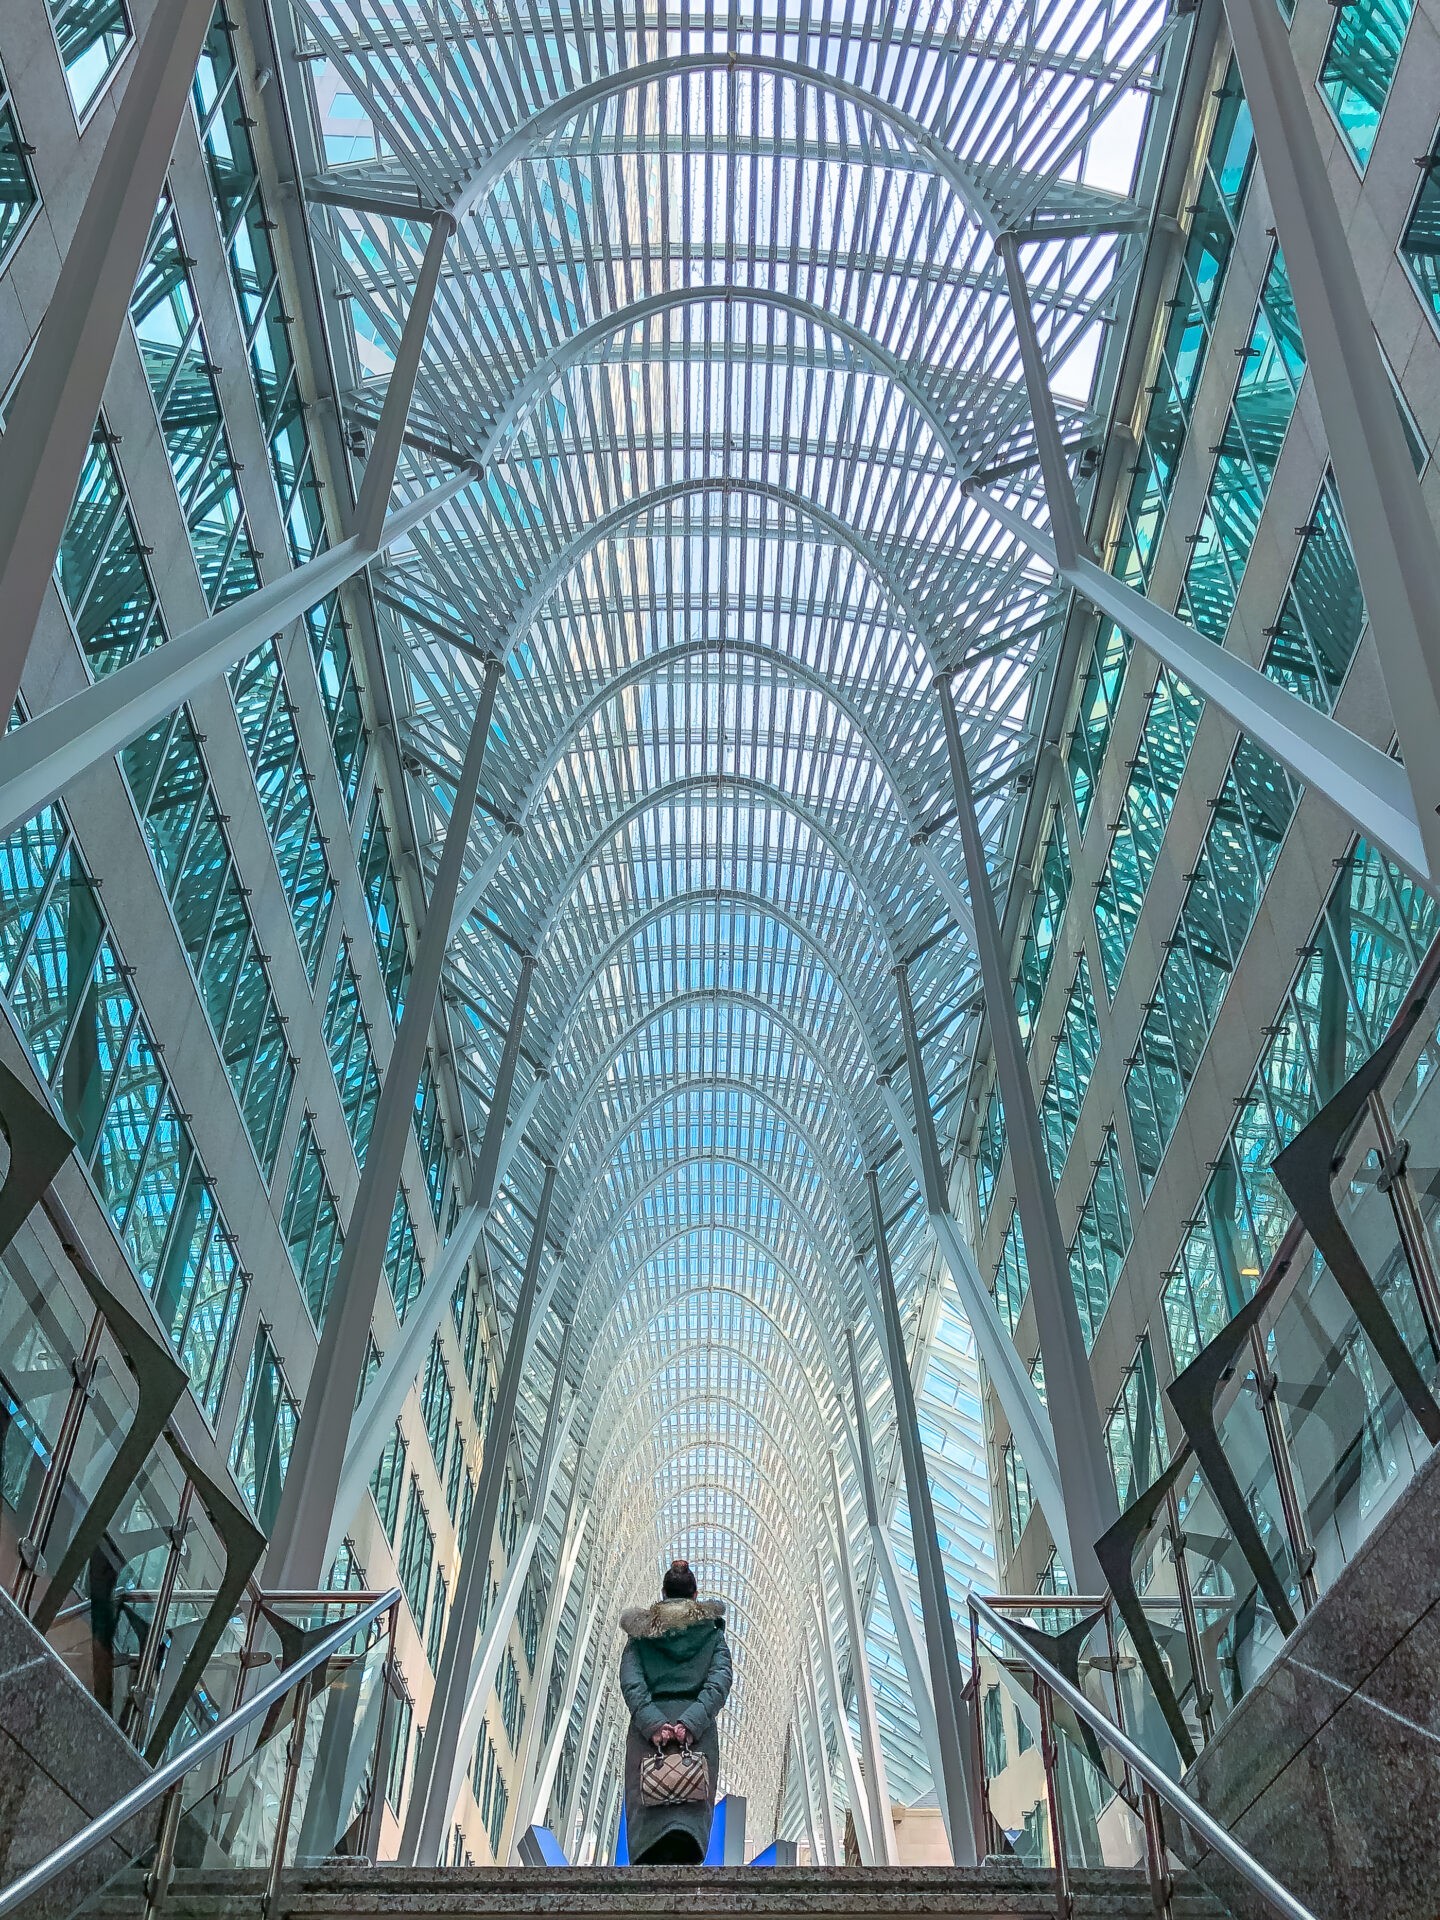 The crystal cathedral of the Allen Lambert Galleria, designed by world-renowned architect Santiago Calatrava in Toronto, Ontario Canada